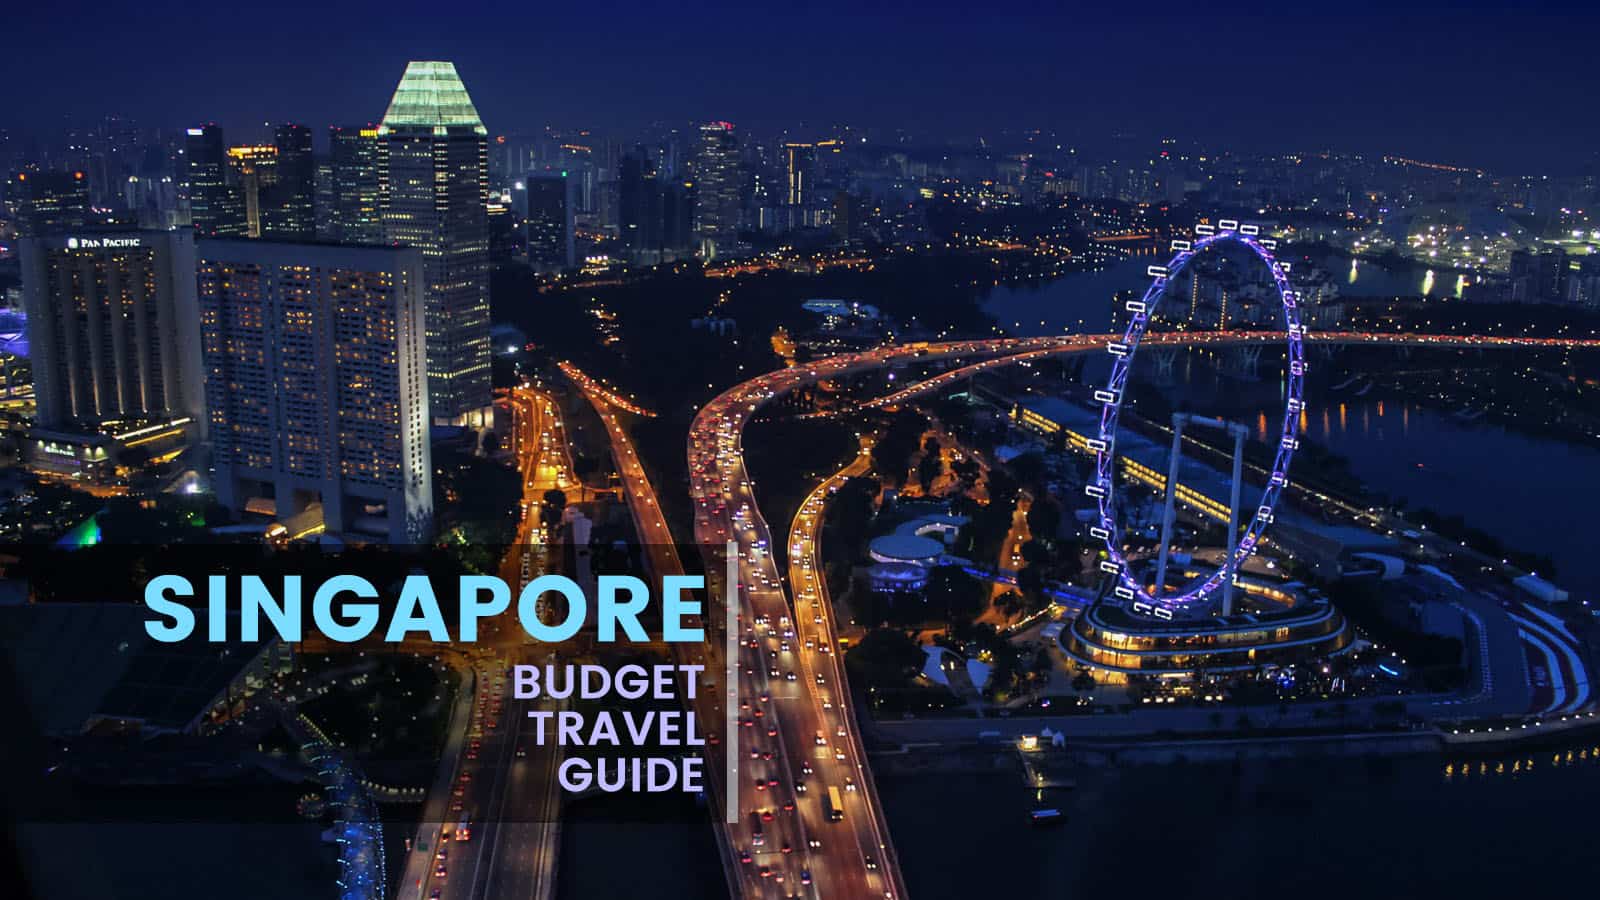 SINGAPORE: Budget Travel Guide (Updated 2014)